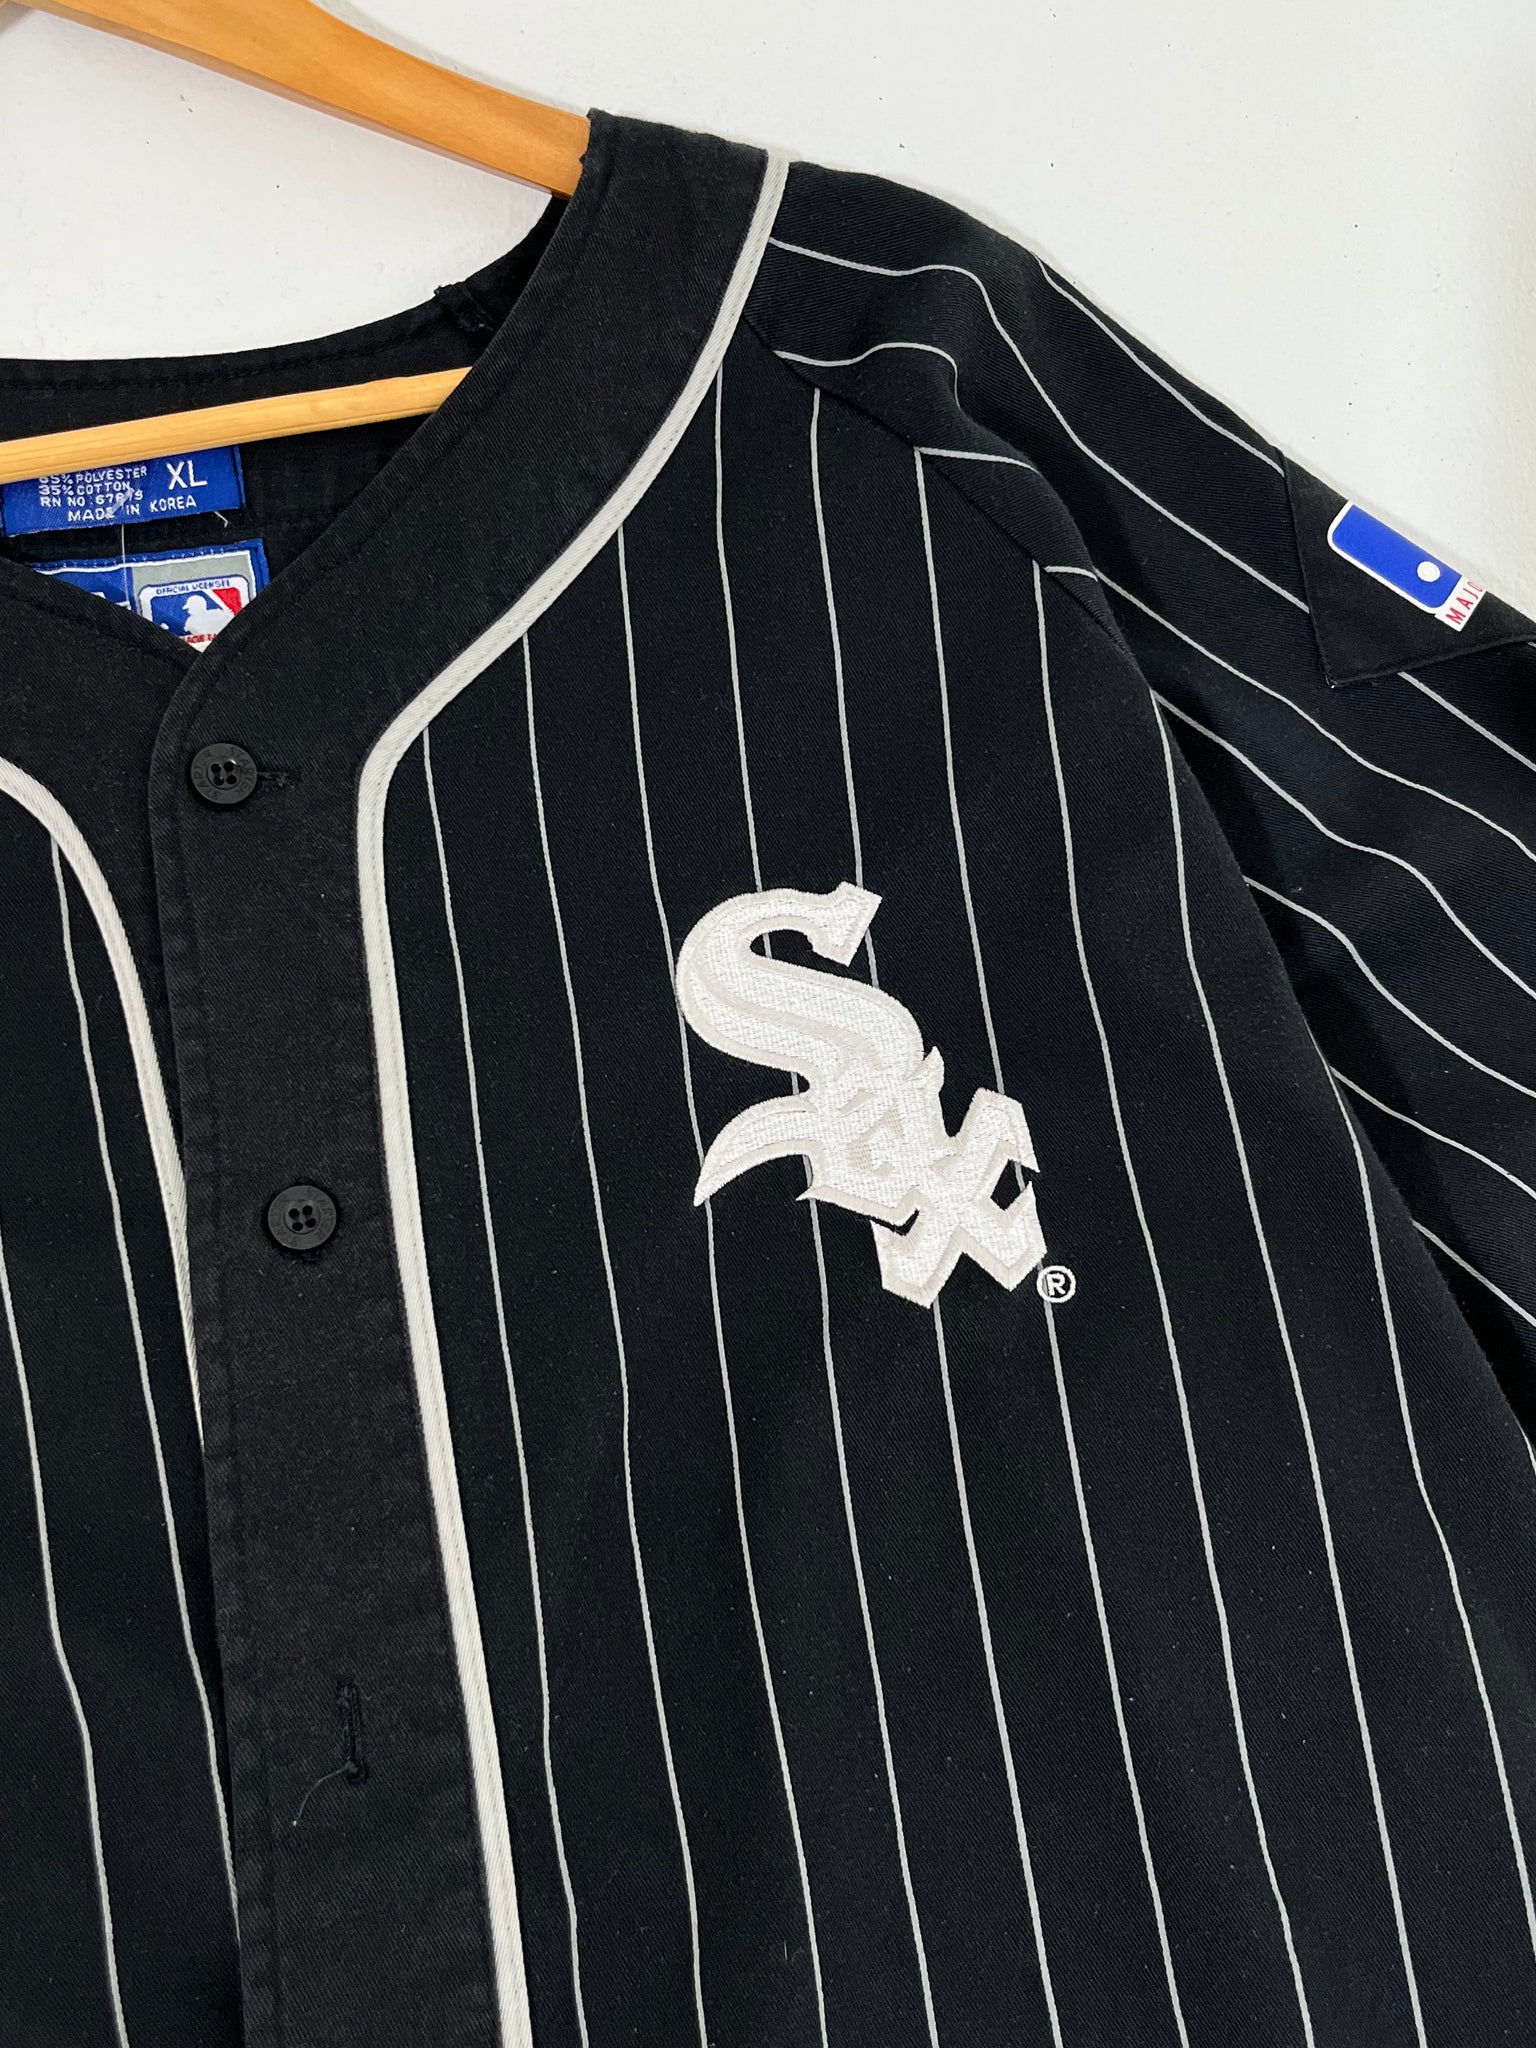 official white sox jersey